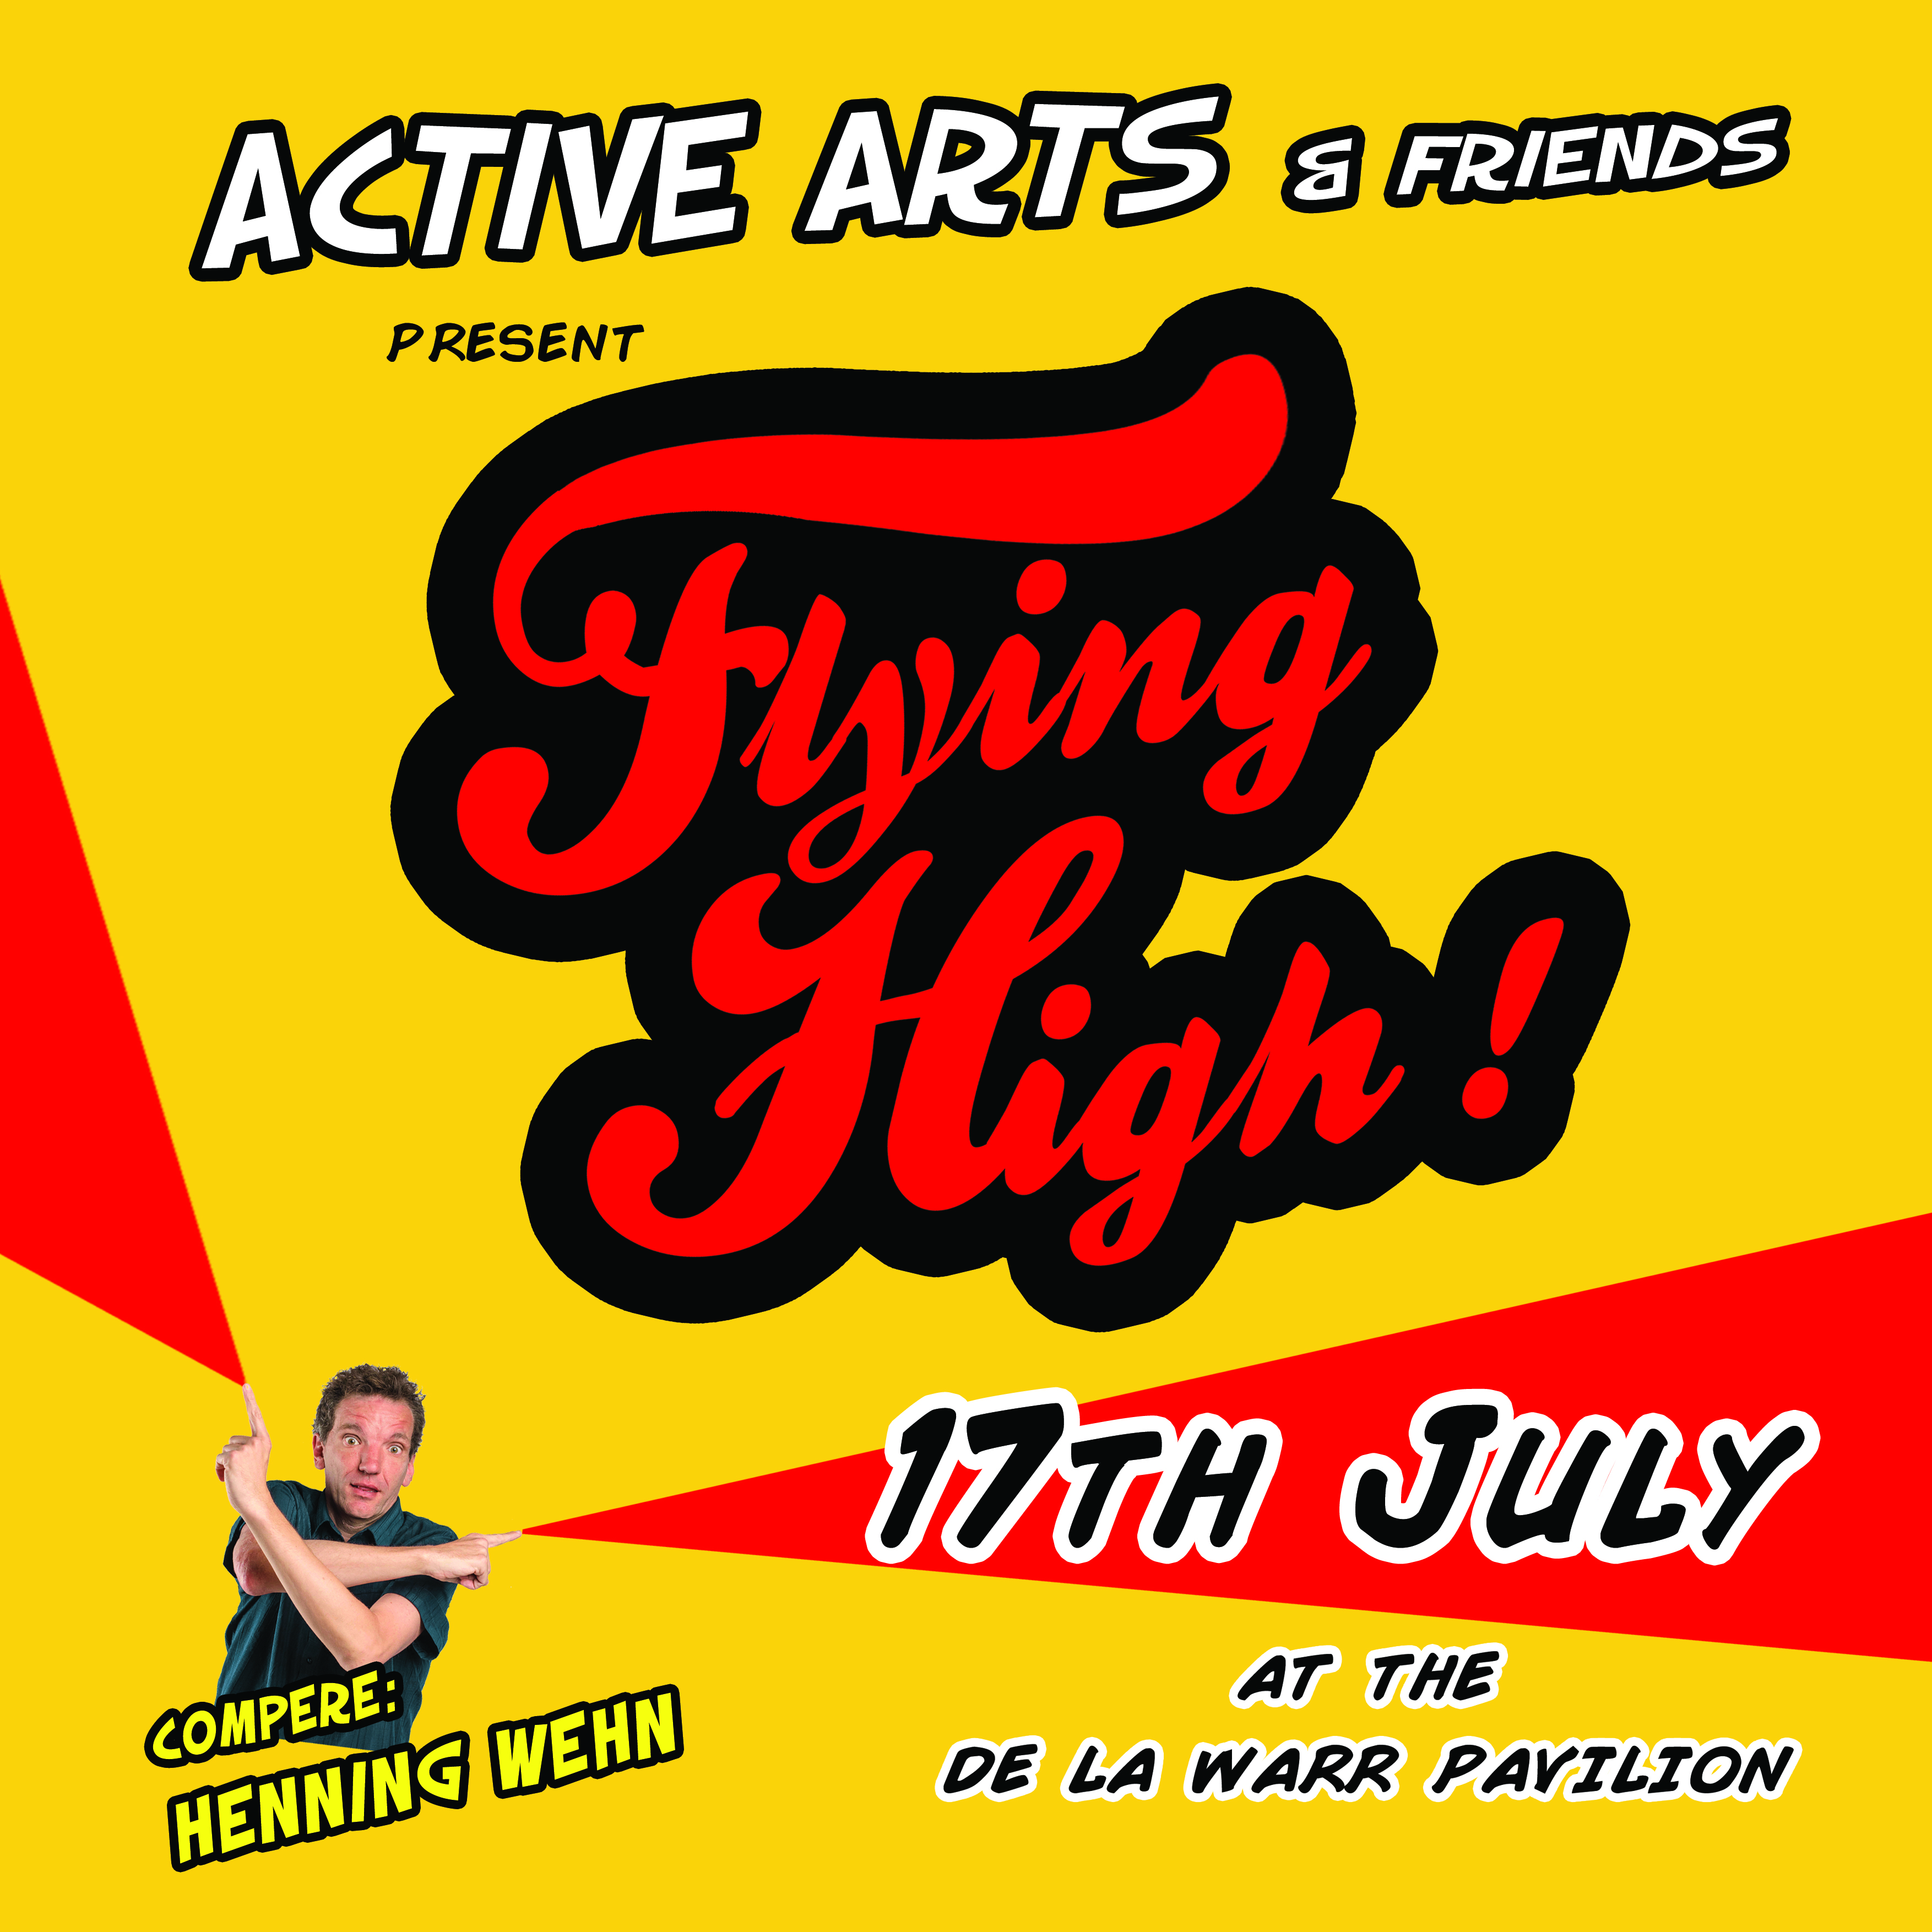 Flying High poster, red and yellow, featuring compere Henning Wehn, de la warr pavilion 2019